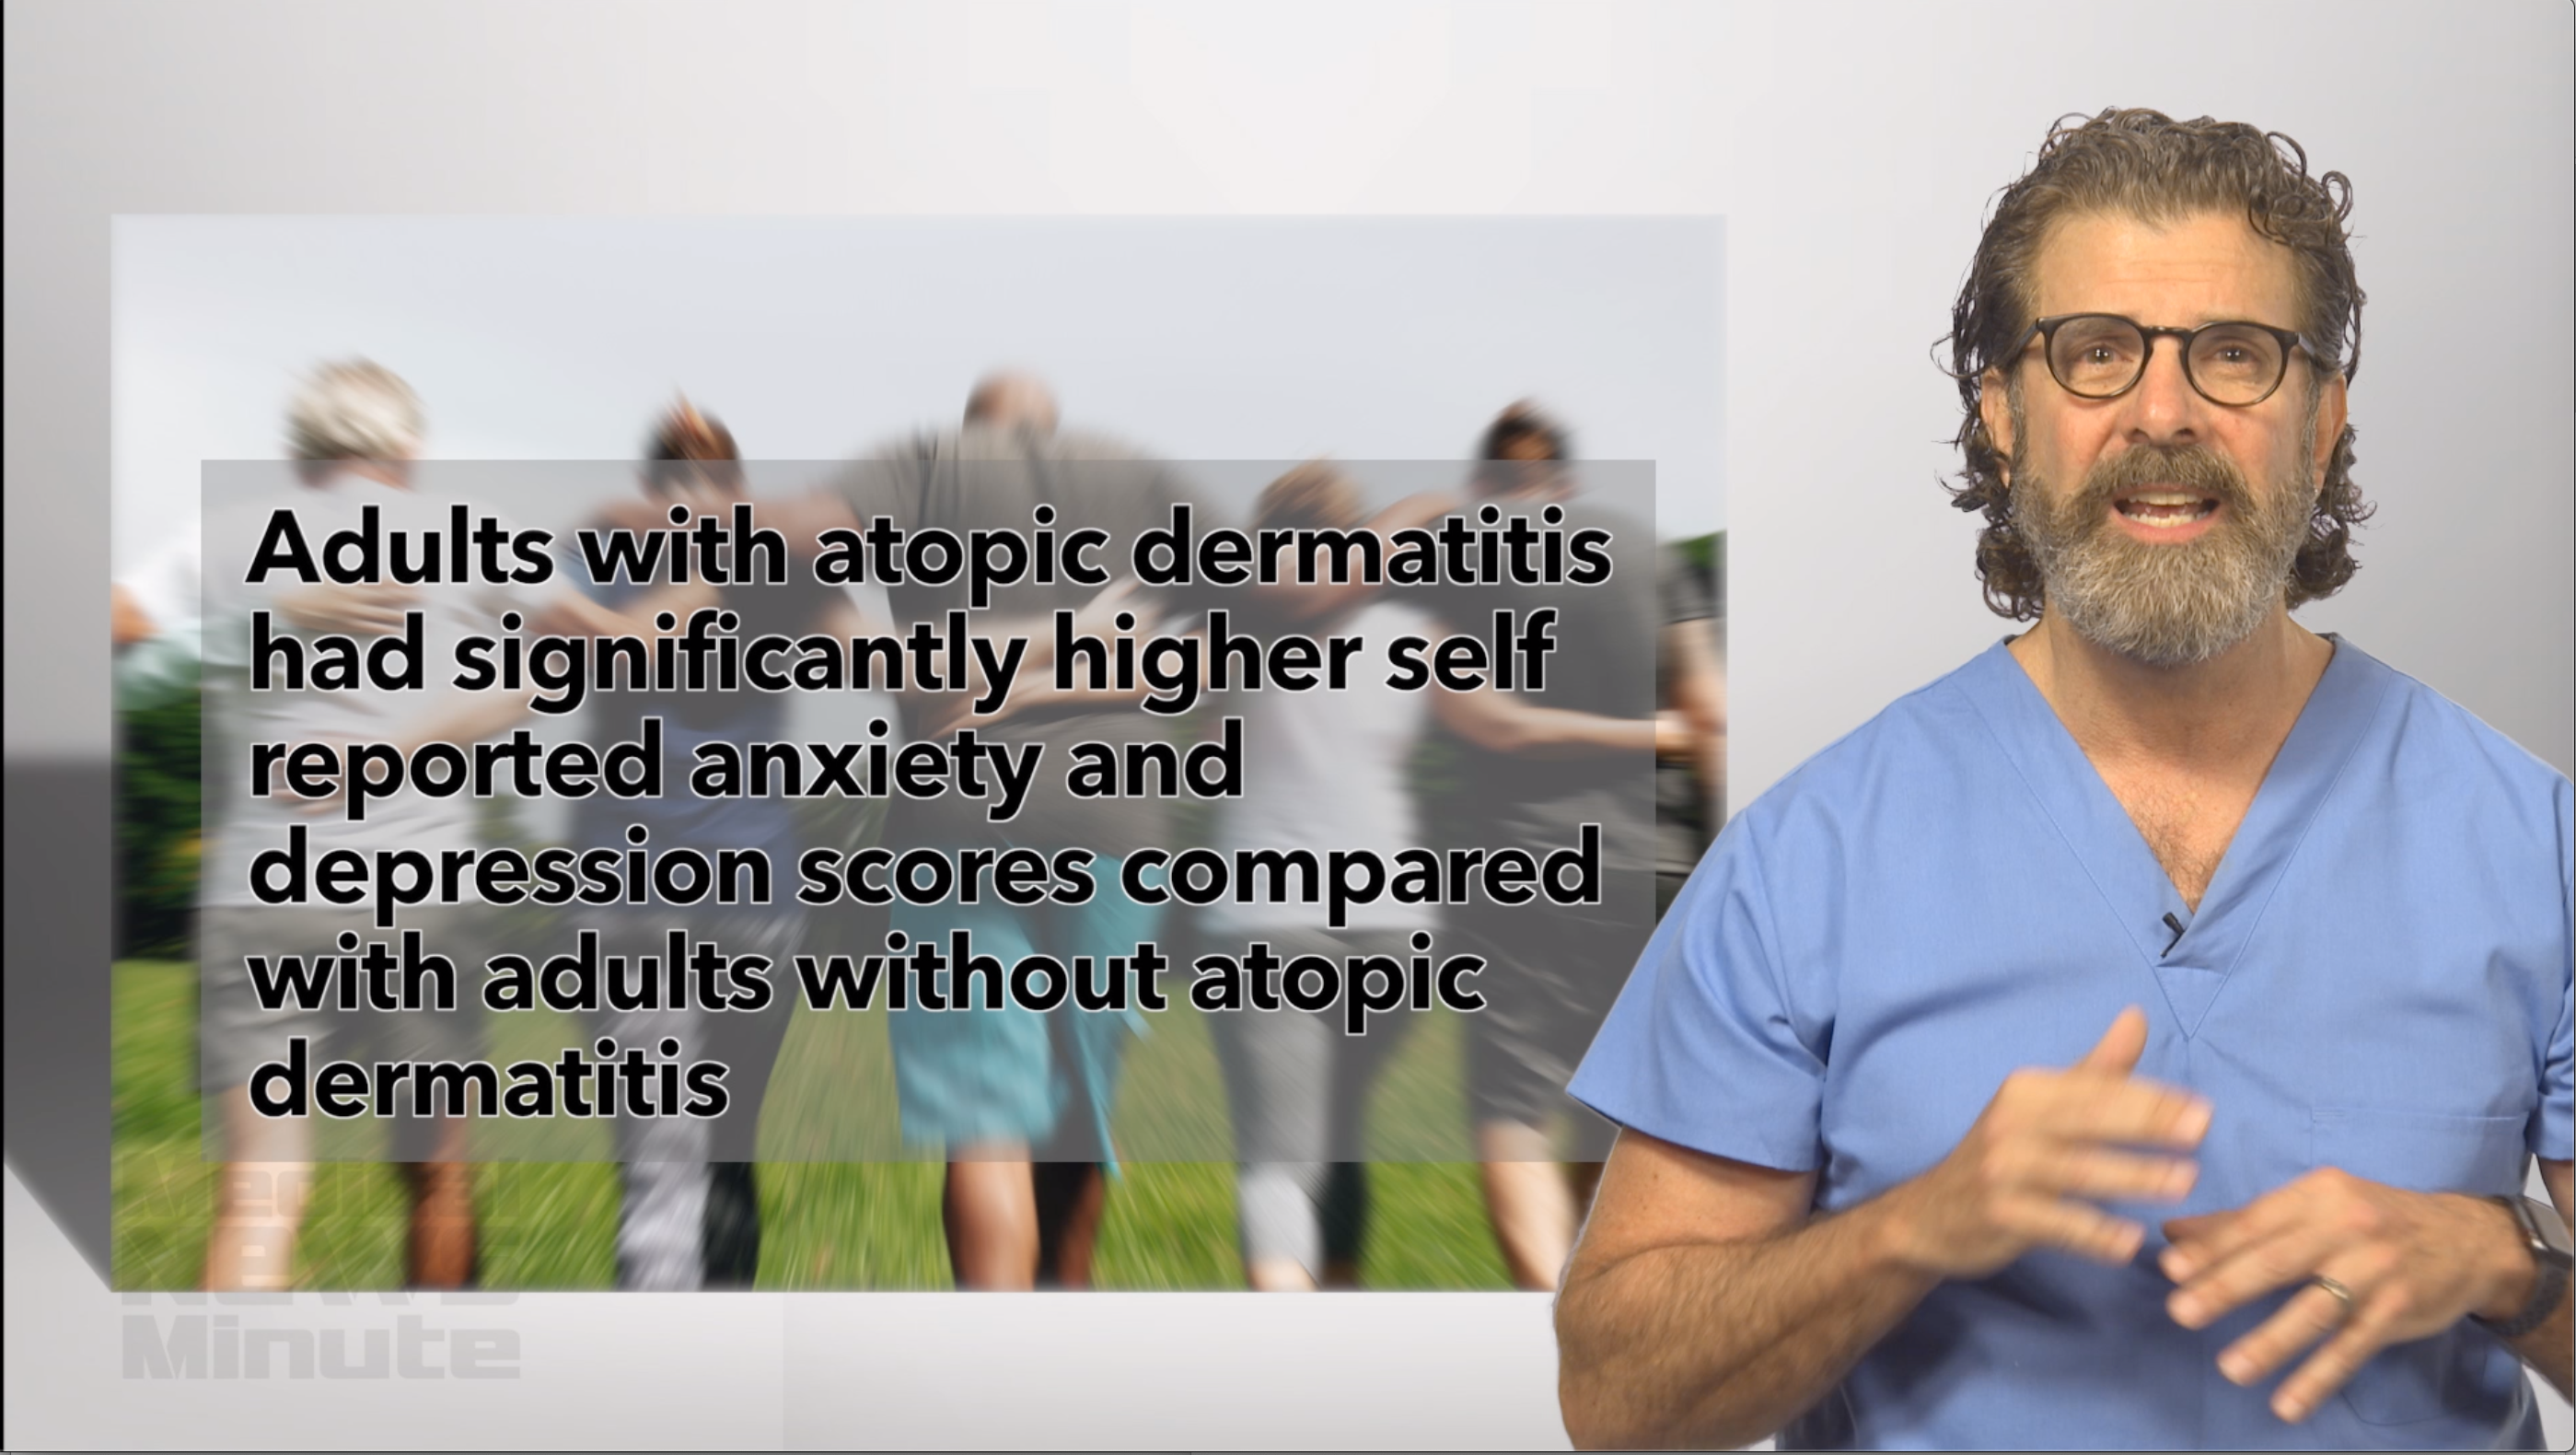 Video: Adult anxiety, depression linked with atopic dermatitis